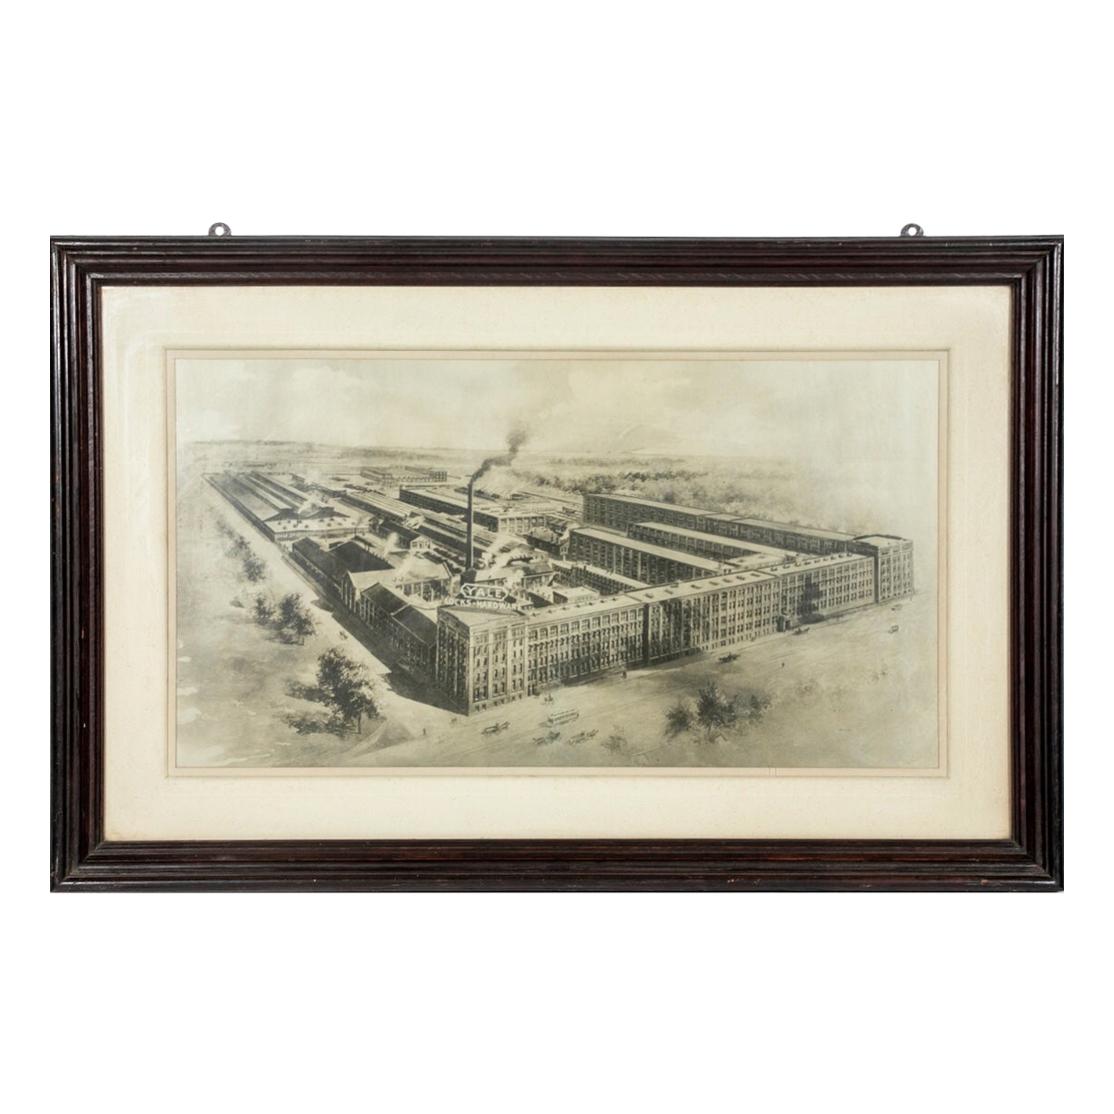 Antique Rendering of a Photo of Yale Locks-Hardware, Stamford Connecticut